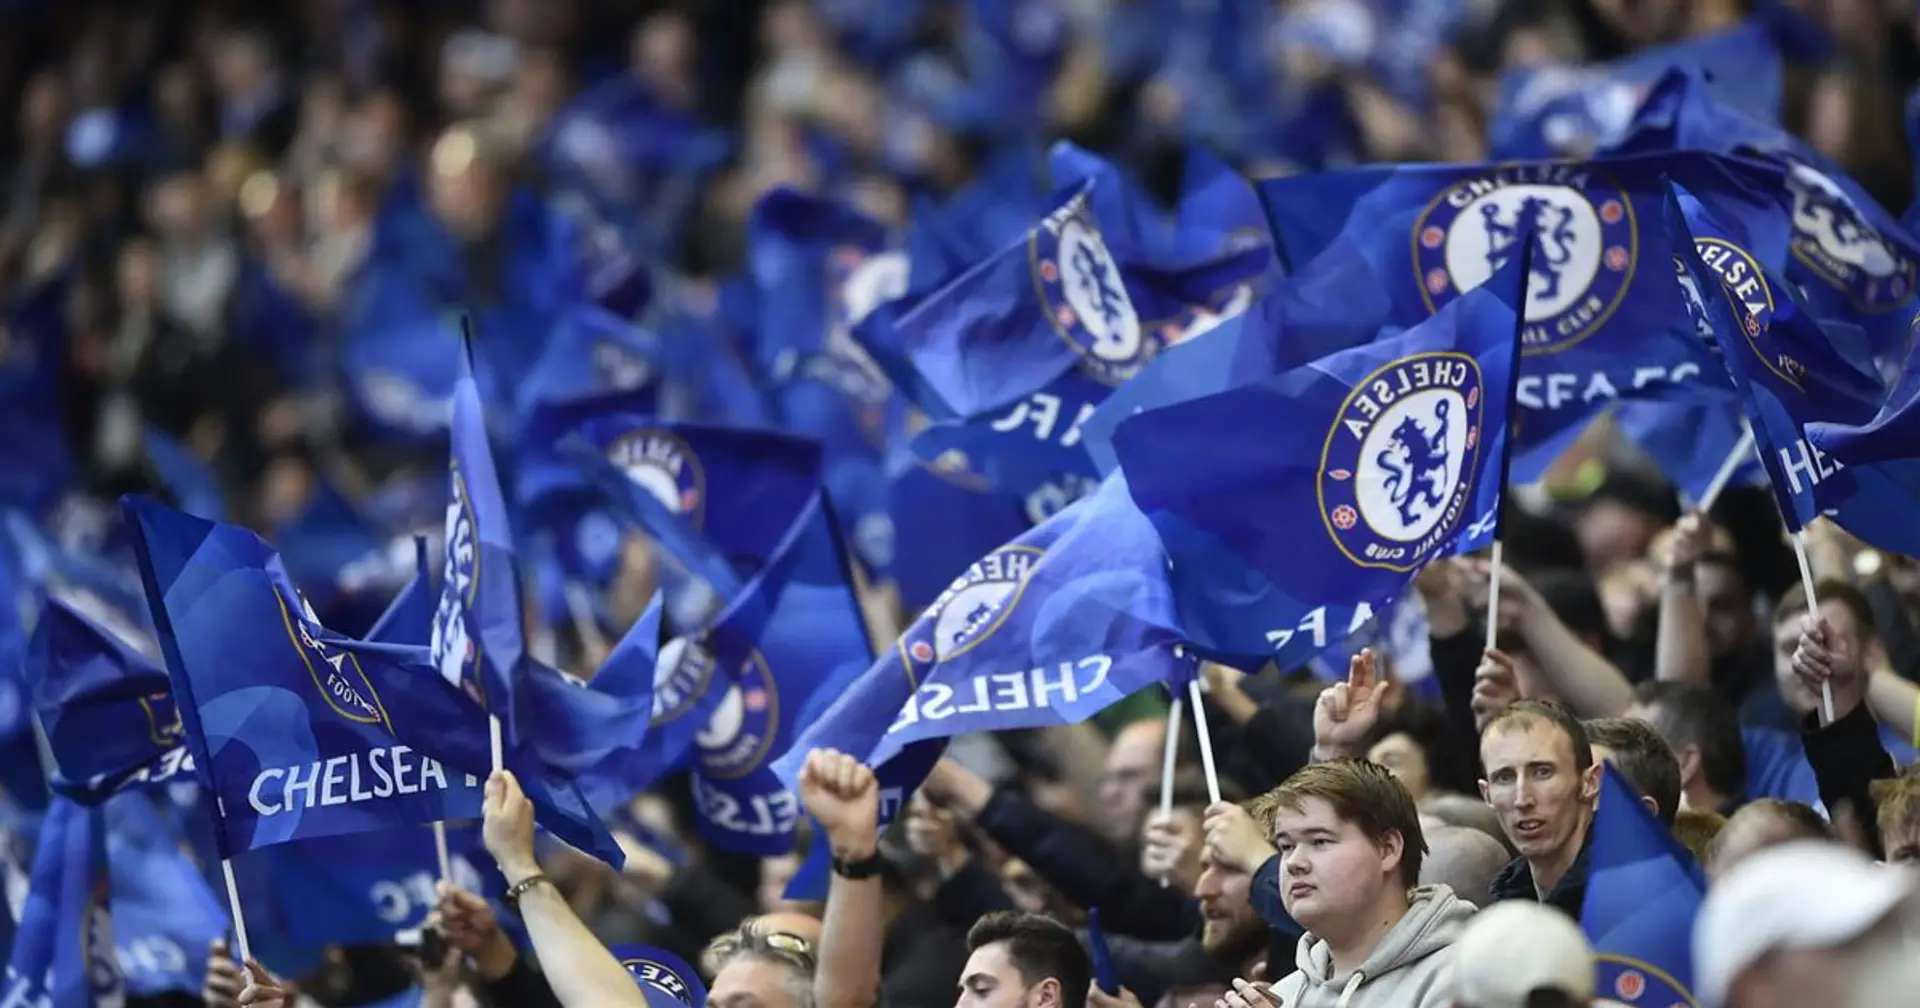 Chelsea fans face signing 'code of conduct' to be allowed into Stamford Bridge next season